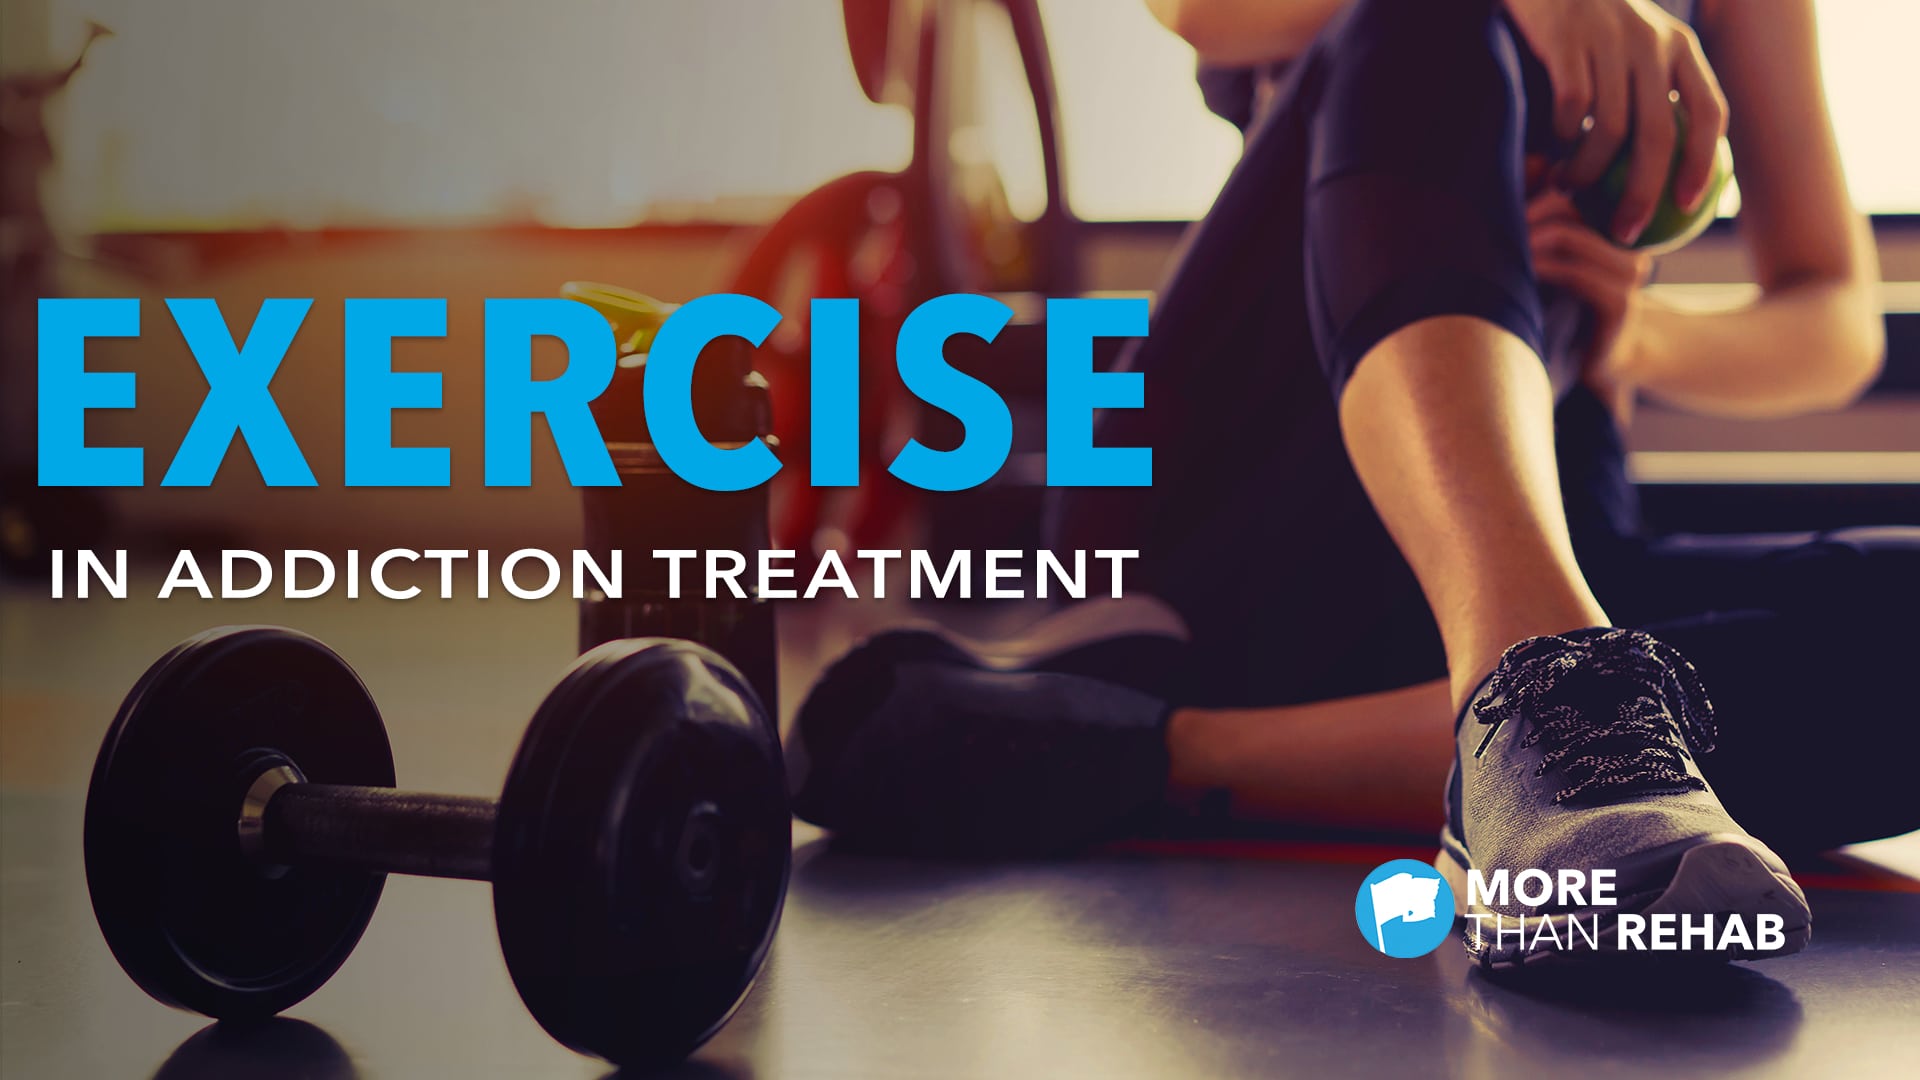 Exercise Addiction: What Is It and How Can You Heal?